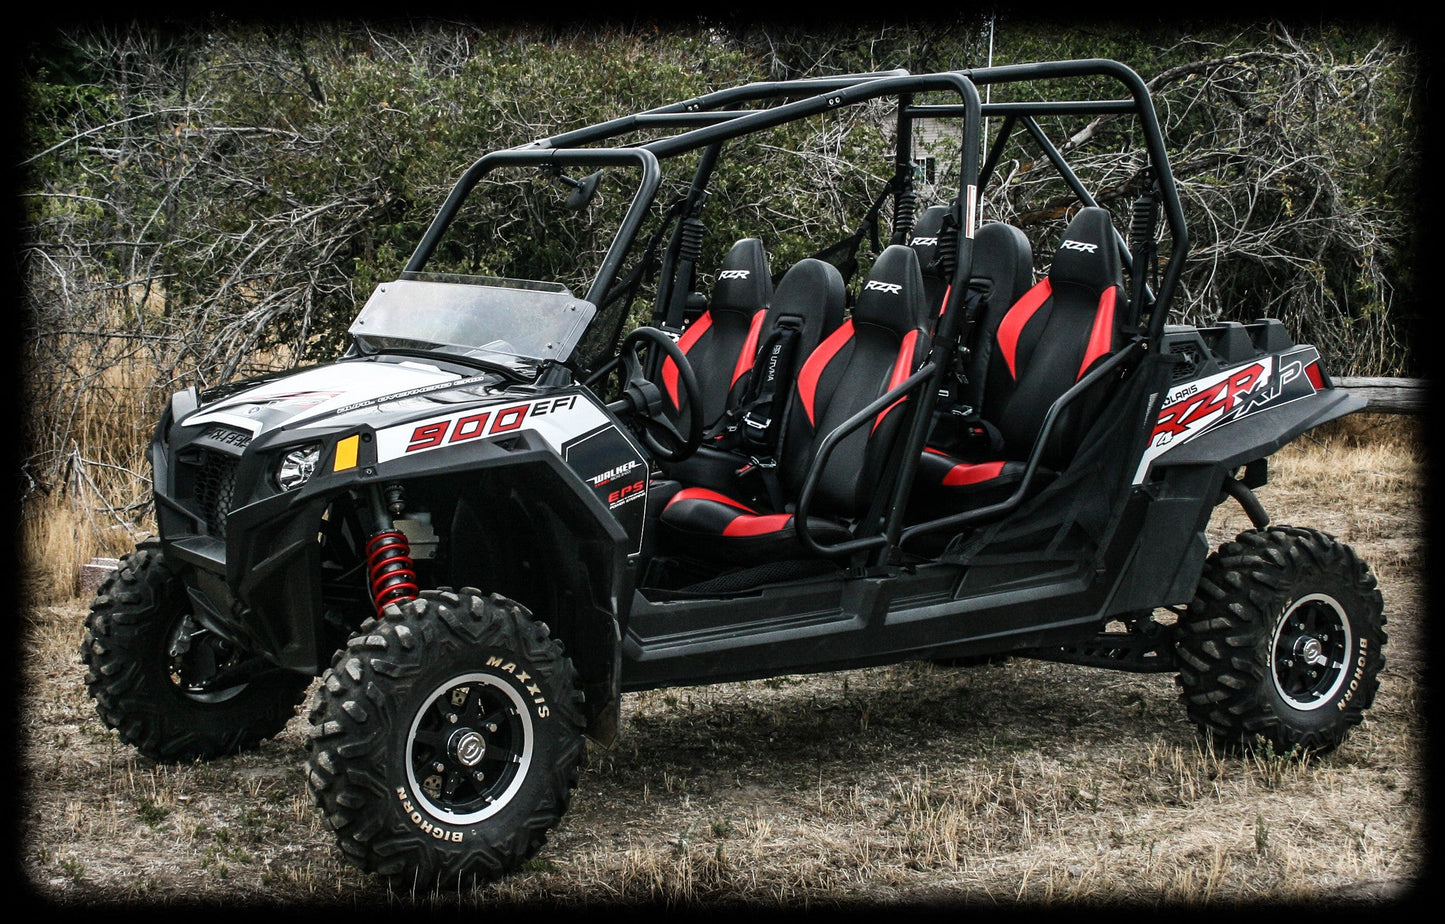 RZR 4 900 Bump Seats (Front and Rear)